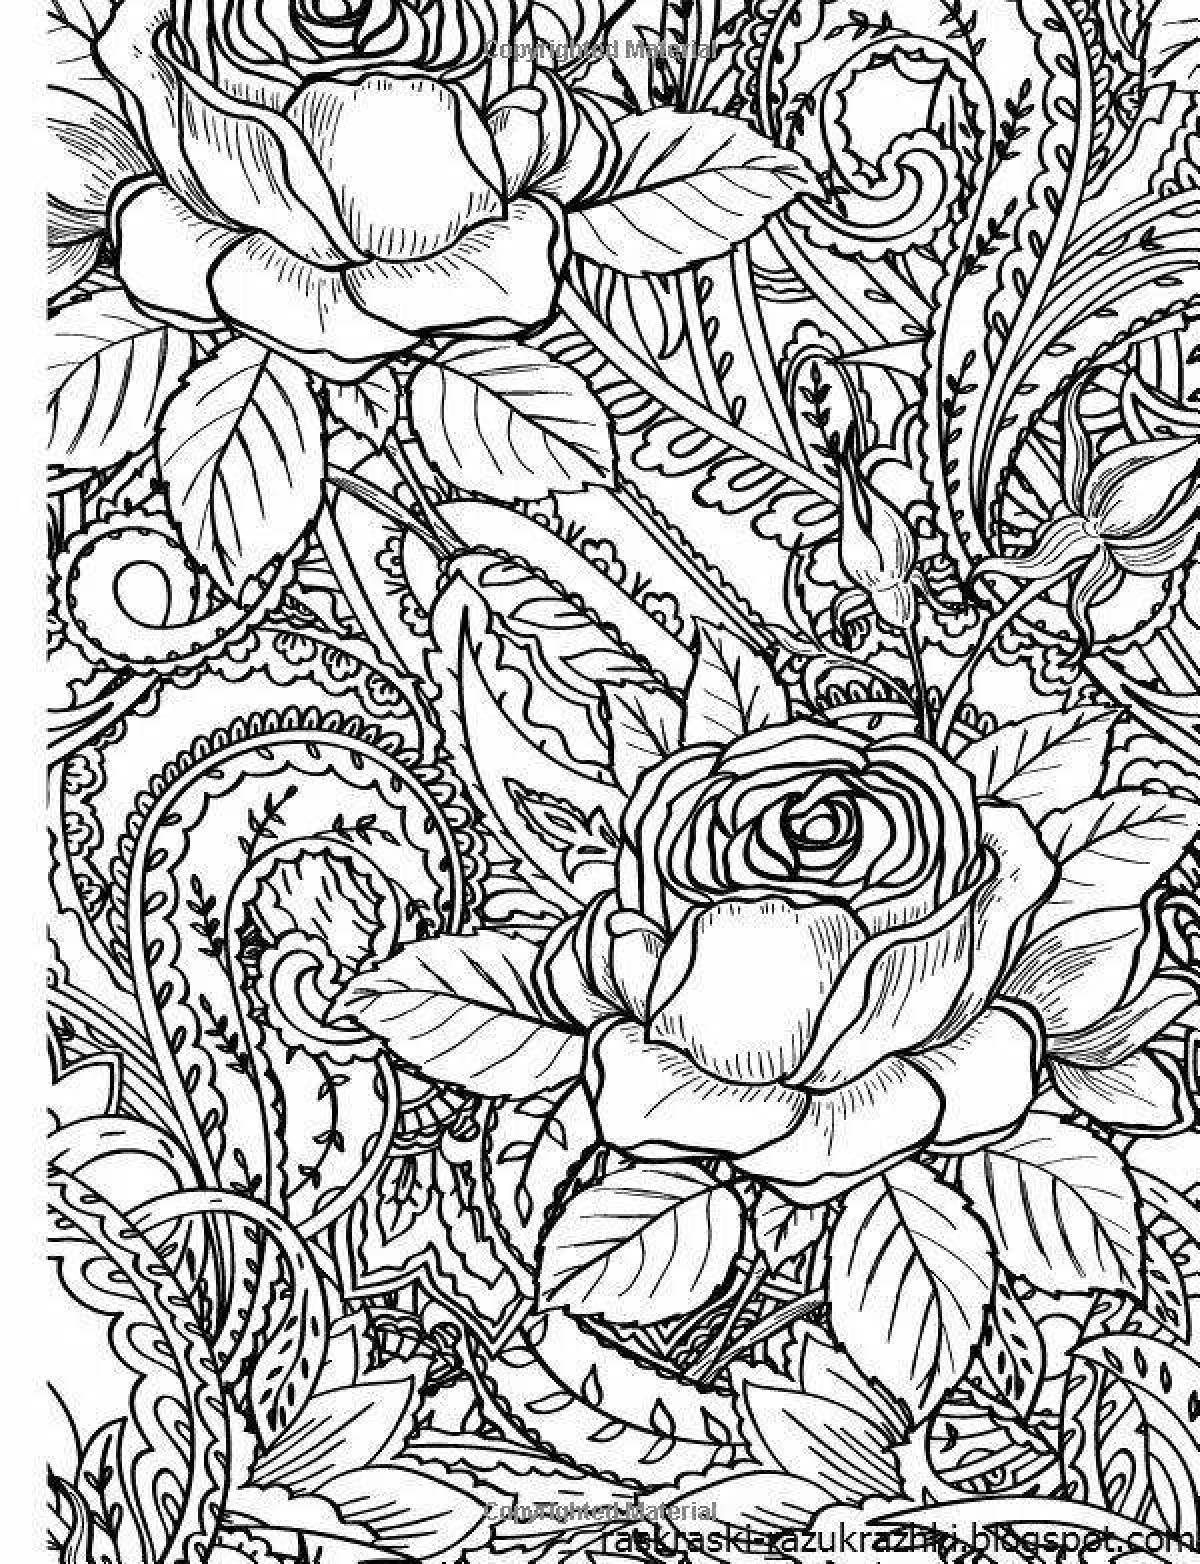 Luxury coloring book is very beautiful and complex